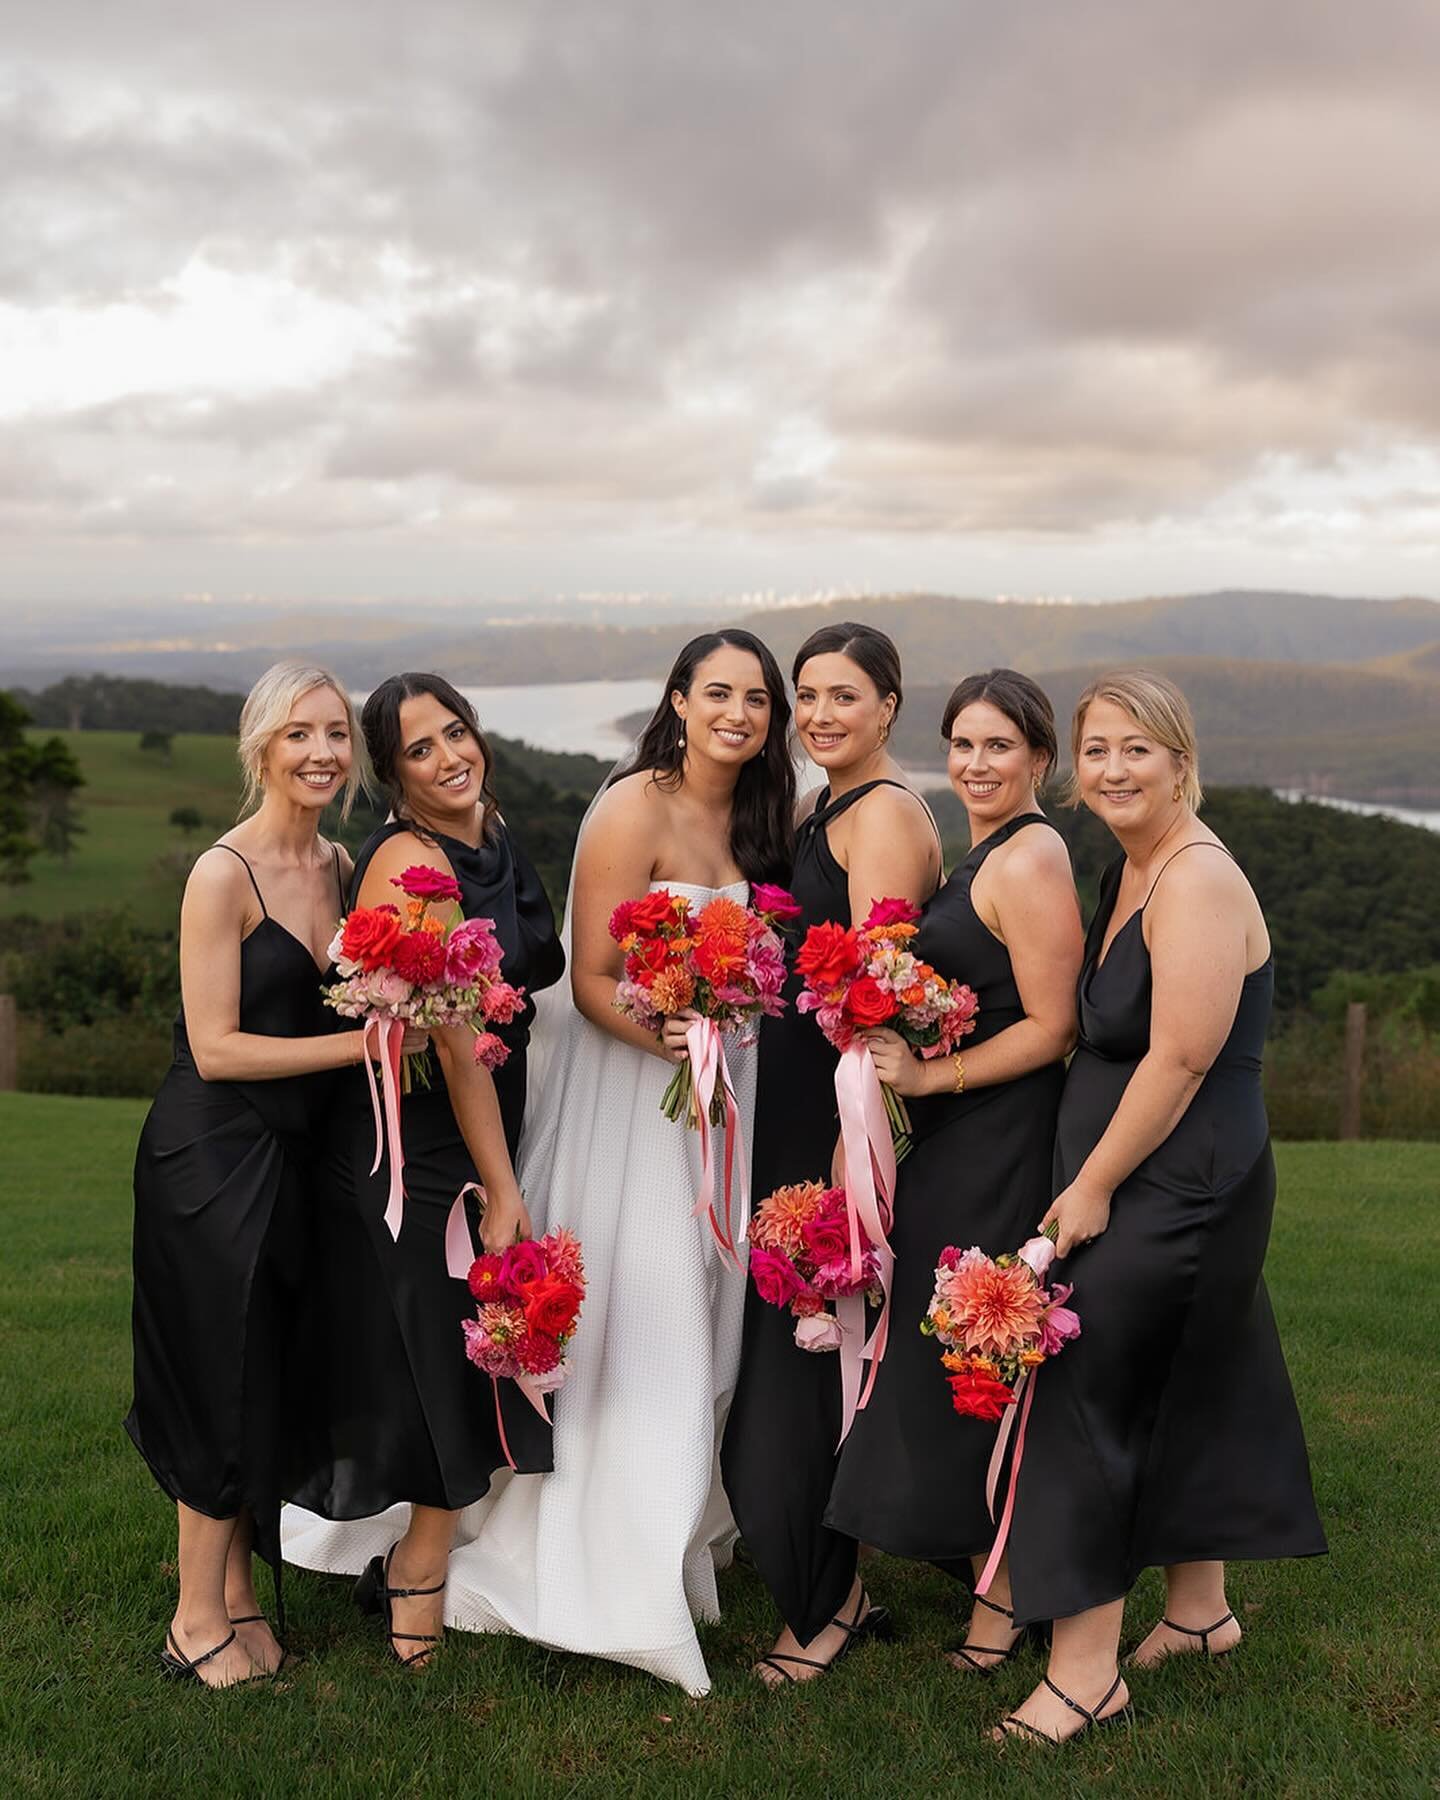 Dream team ❤️ Monica + Michael&rsquo;s special day at Rosewood Estate

Wedding suppliers:

Photographer @figtreepictures
Venue @rosewood_estate
Celebrant @katecelebrant
Florist @bumble_bloom
Videographer @wild.weddings
Stylist + Coordinator @scenicri